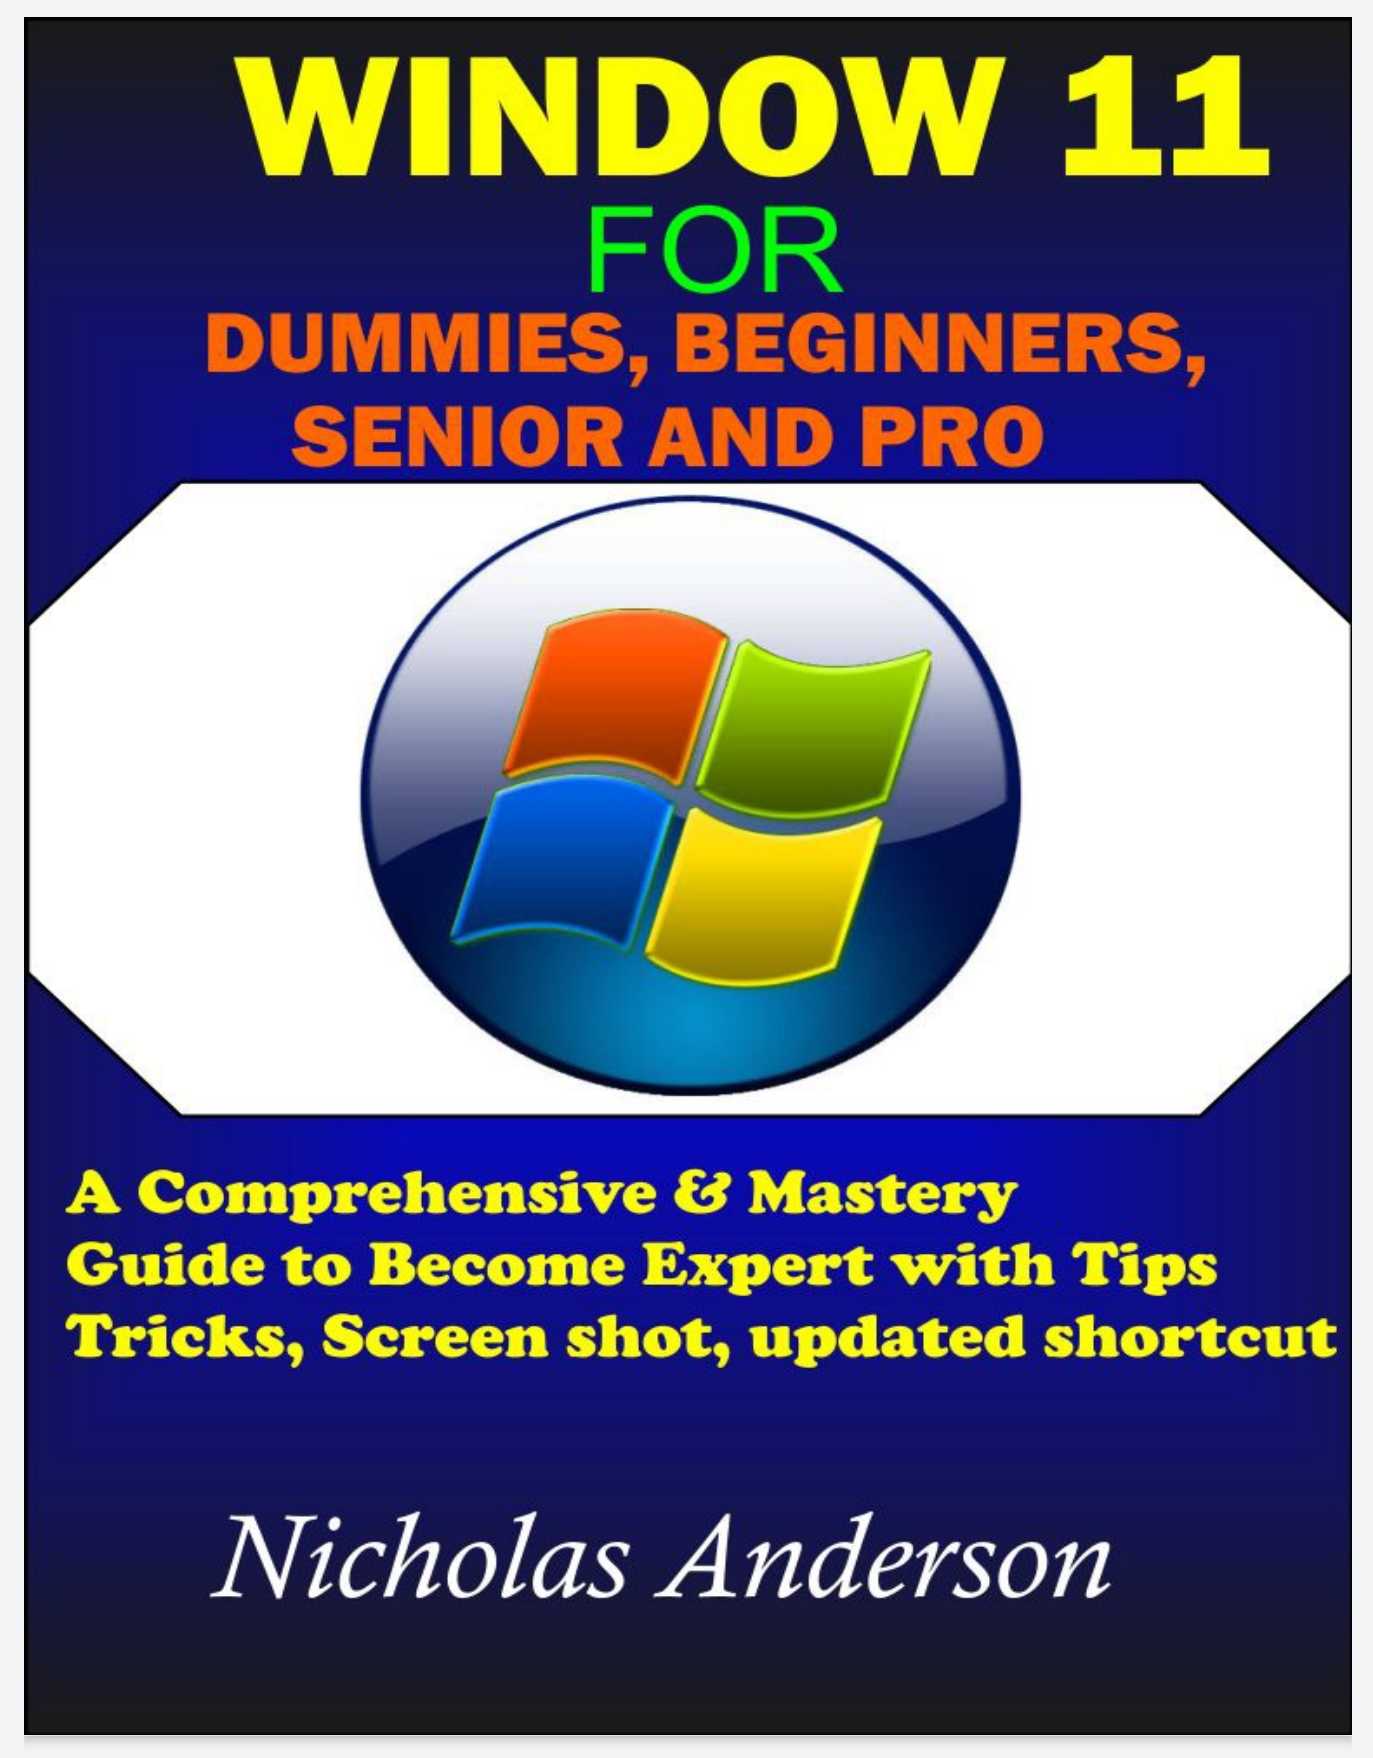 Window 11 Dummies, Beginners, Senior And Pro: A Comprehensive & Mastery Guide To Become Expert With Tips, Tricks